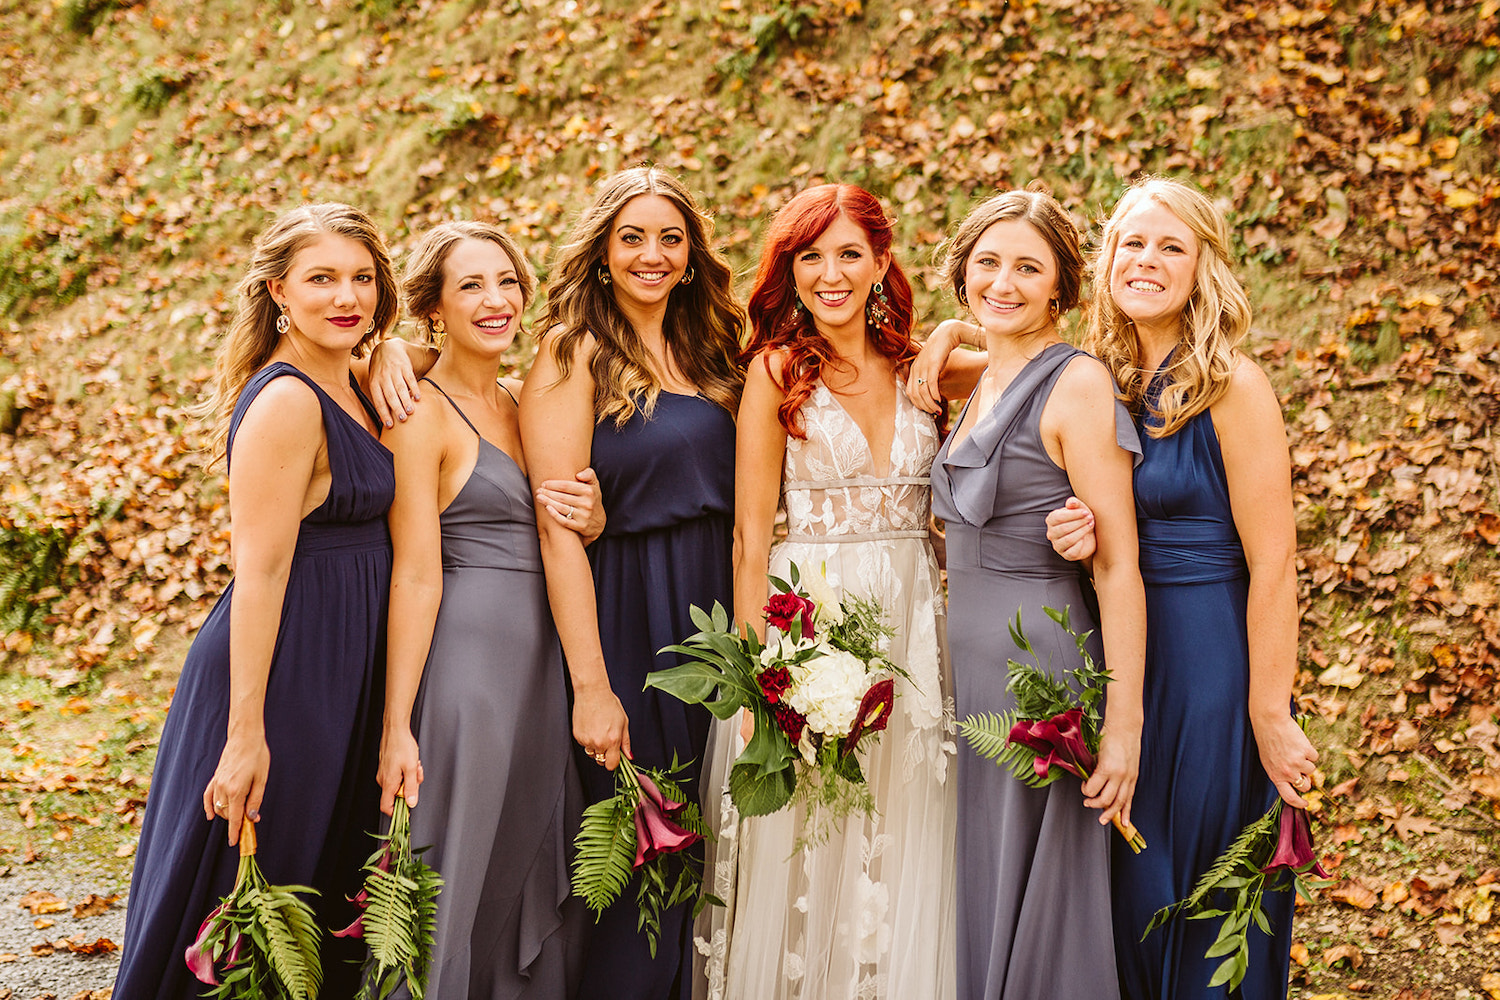 bride and bridesmaids in various blue satin gowns stand with their flowers at their sides